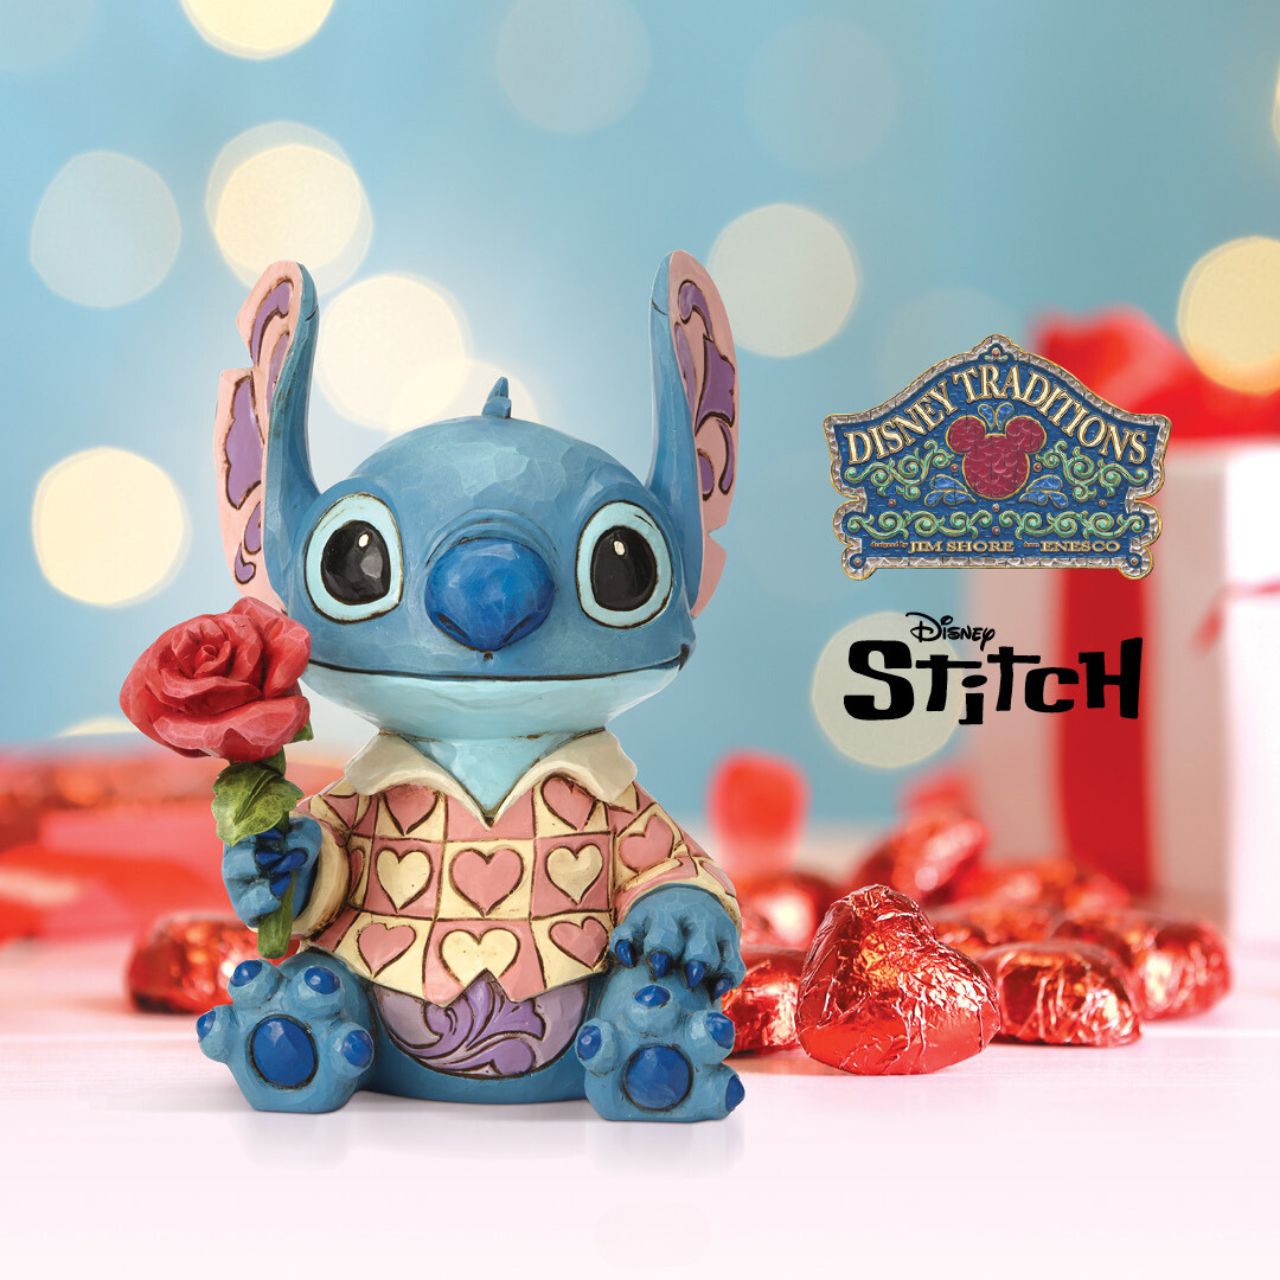 Disney Traditions Clueless Casanova Stitch Figurine  Stitch has transformed into a model citizen that Lilo would be proud of! Designed by Jim Shore, the adorable alien wears a heart-patterned shirt as he offers a single red rose. Stitch makes a great gift for your Ohana.